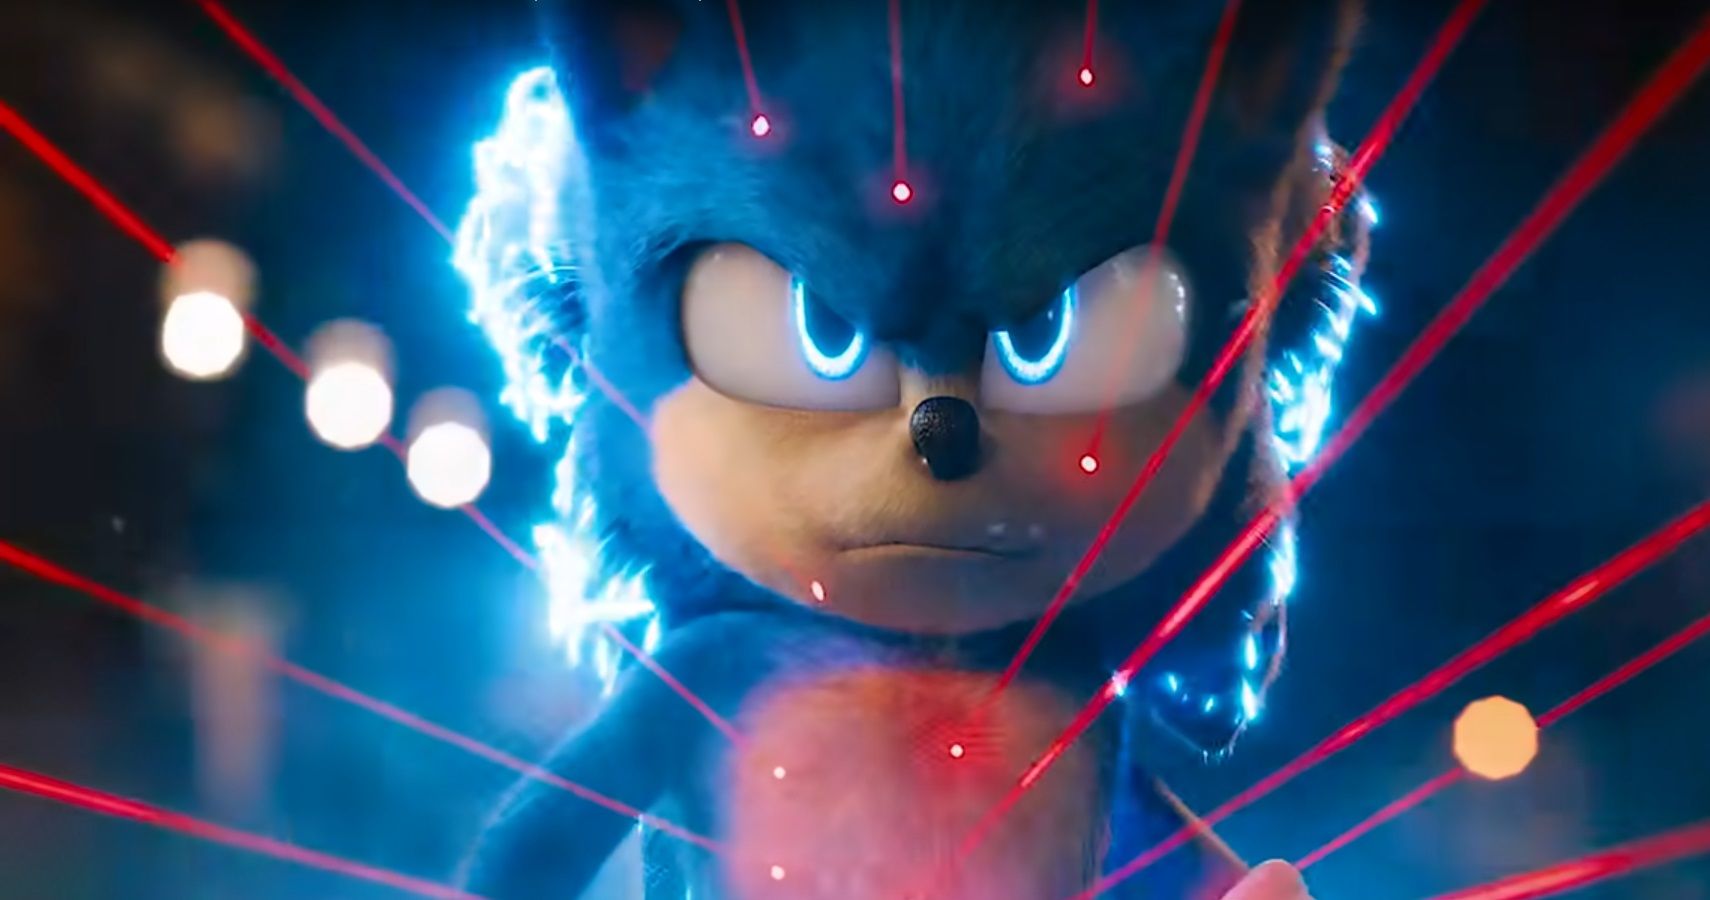 Sonic Movie Gets Early Digital Release (Since Cinemas Are Closed)